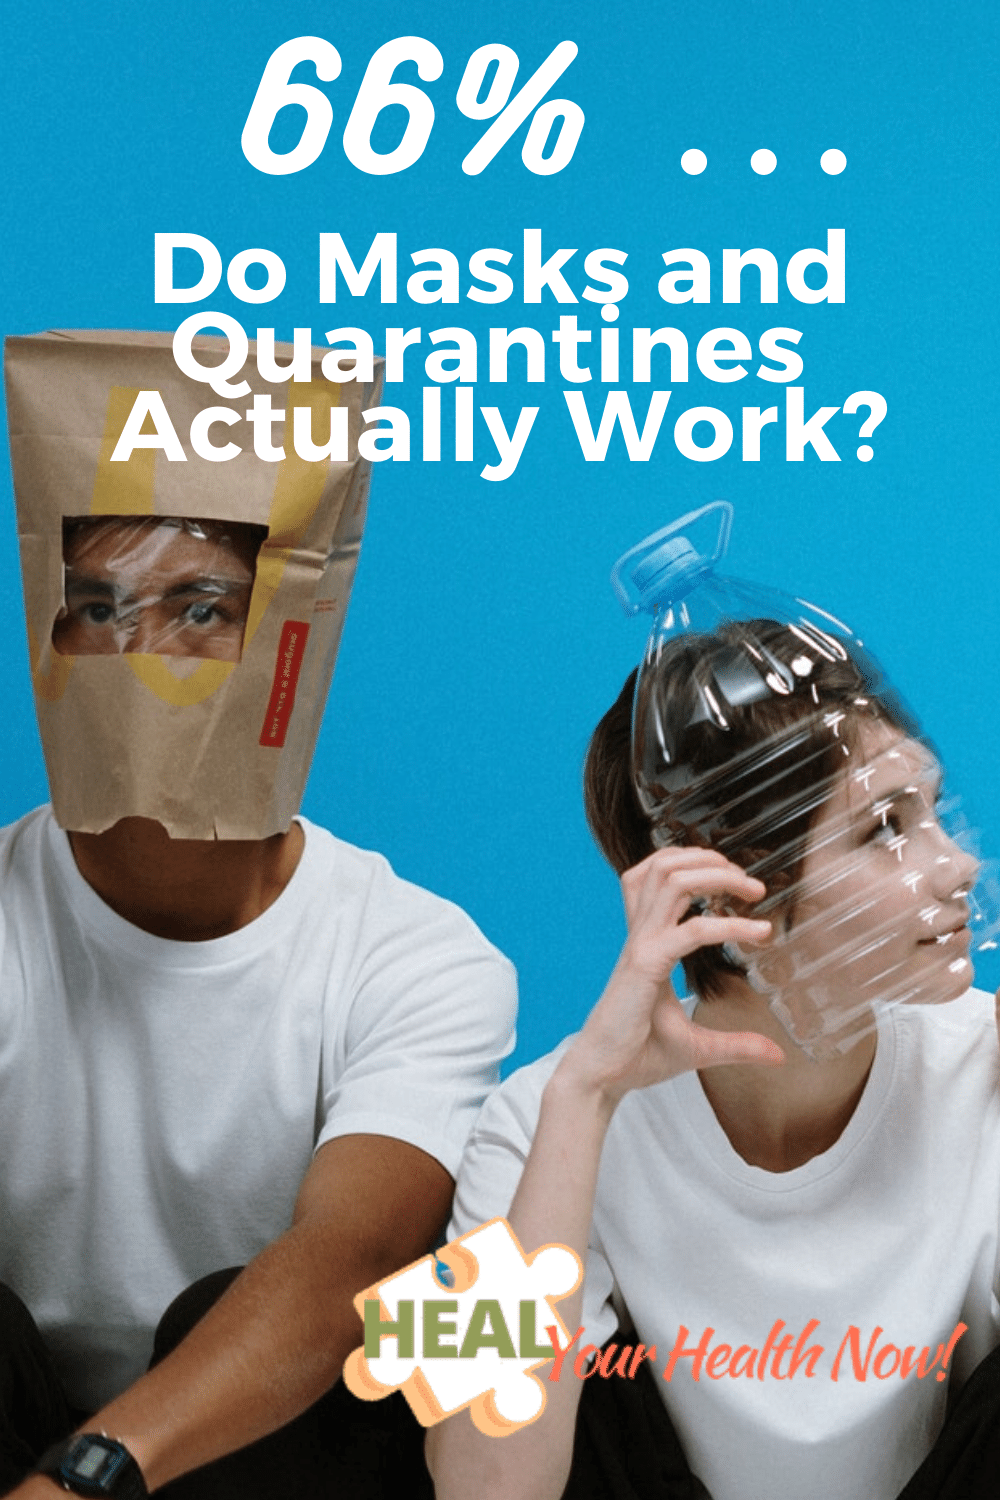 66% ... Do Masks and Quarantines Actually Work?